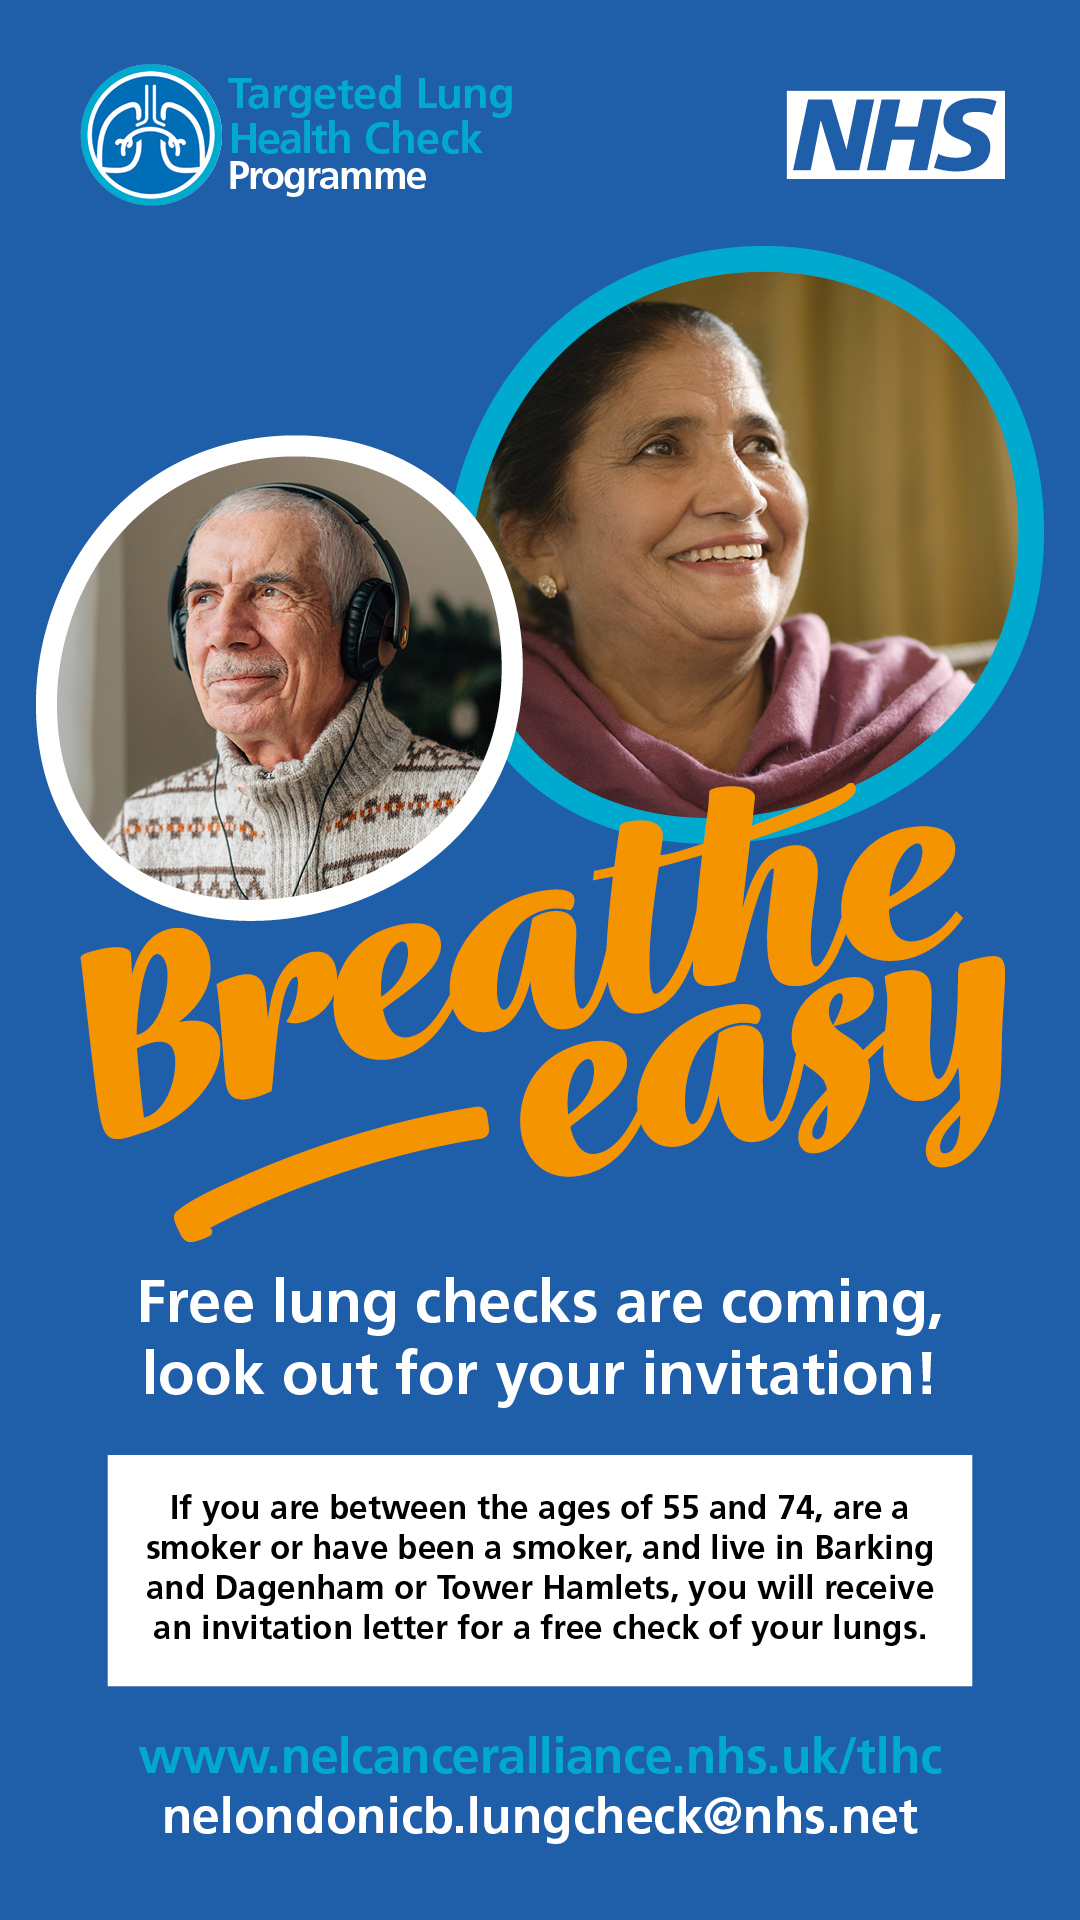 Targeted Lung Health Check